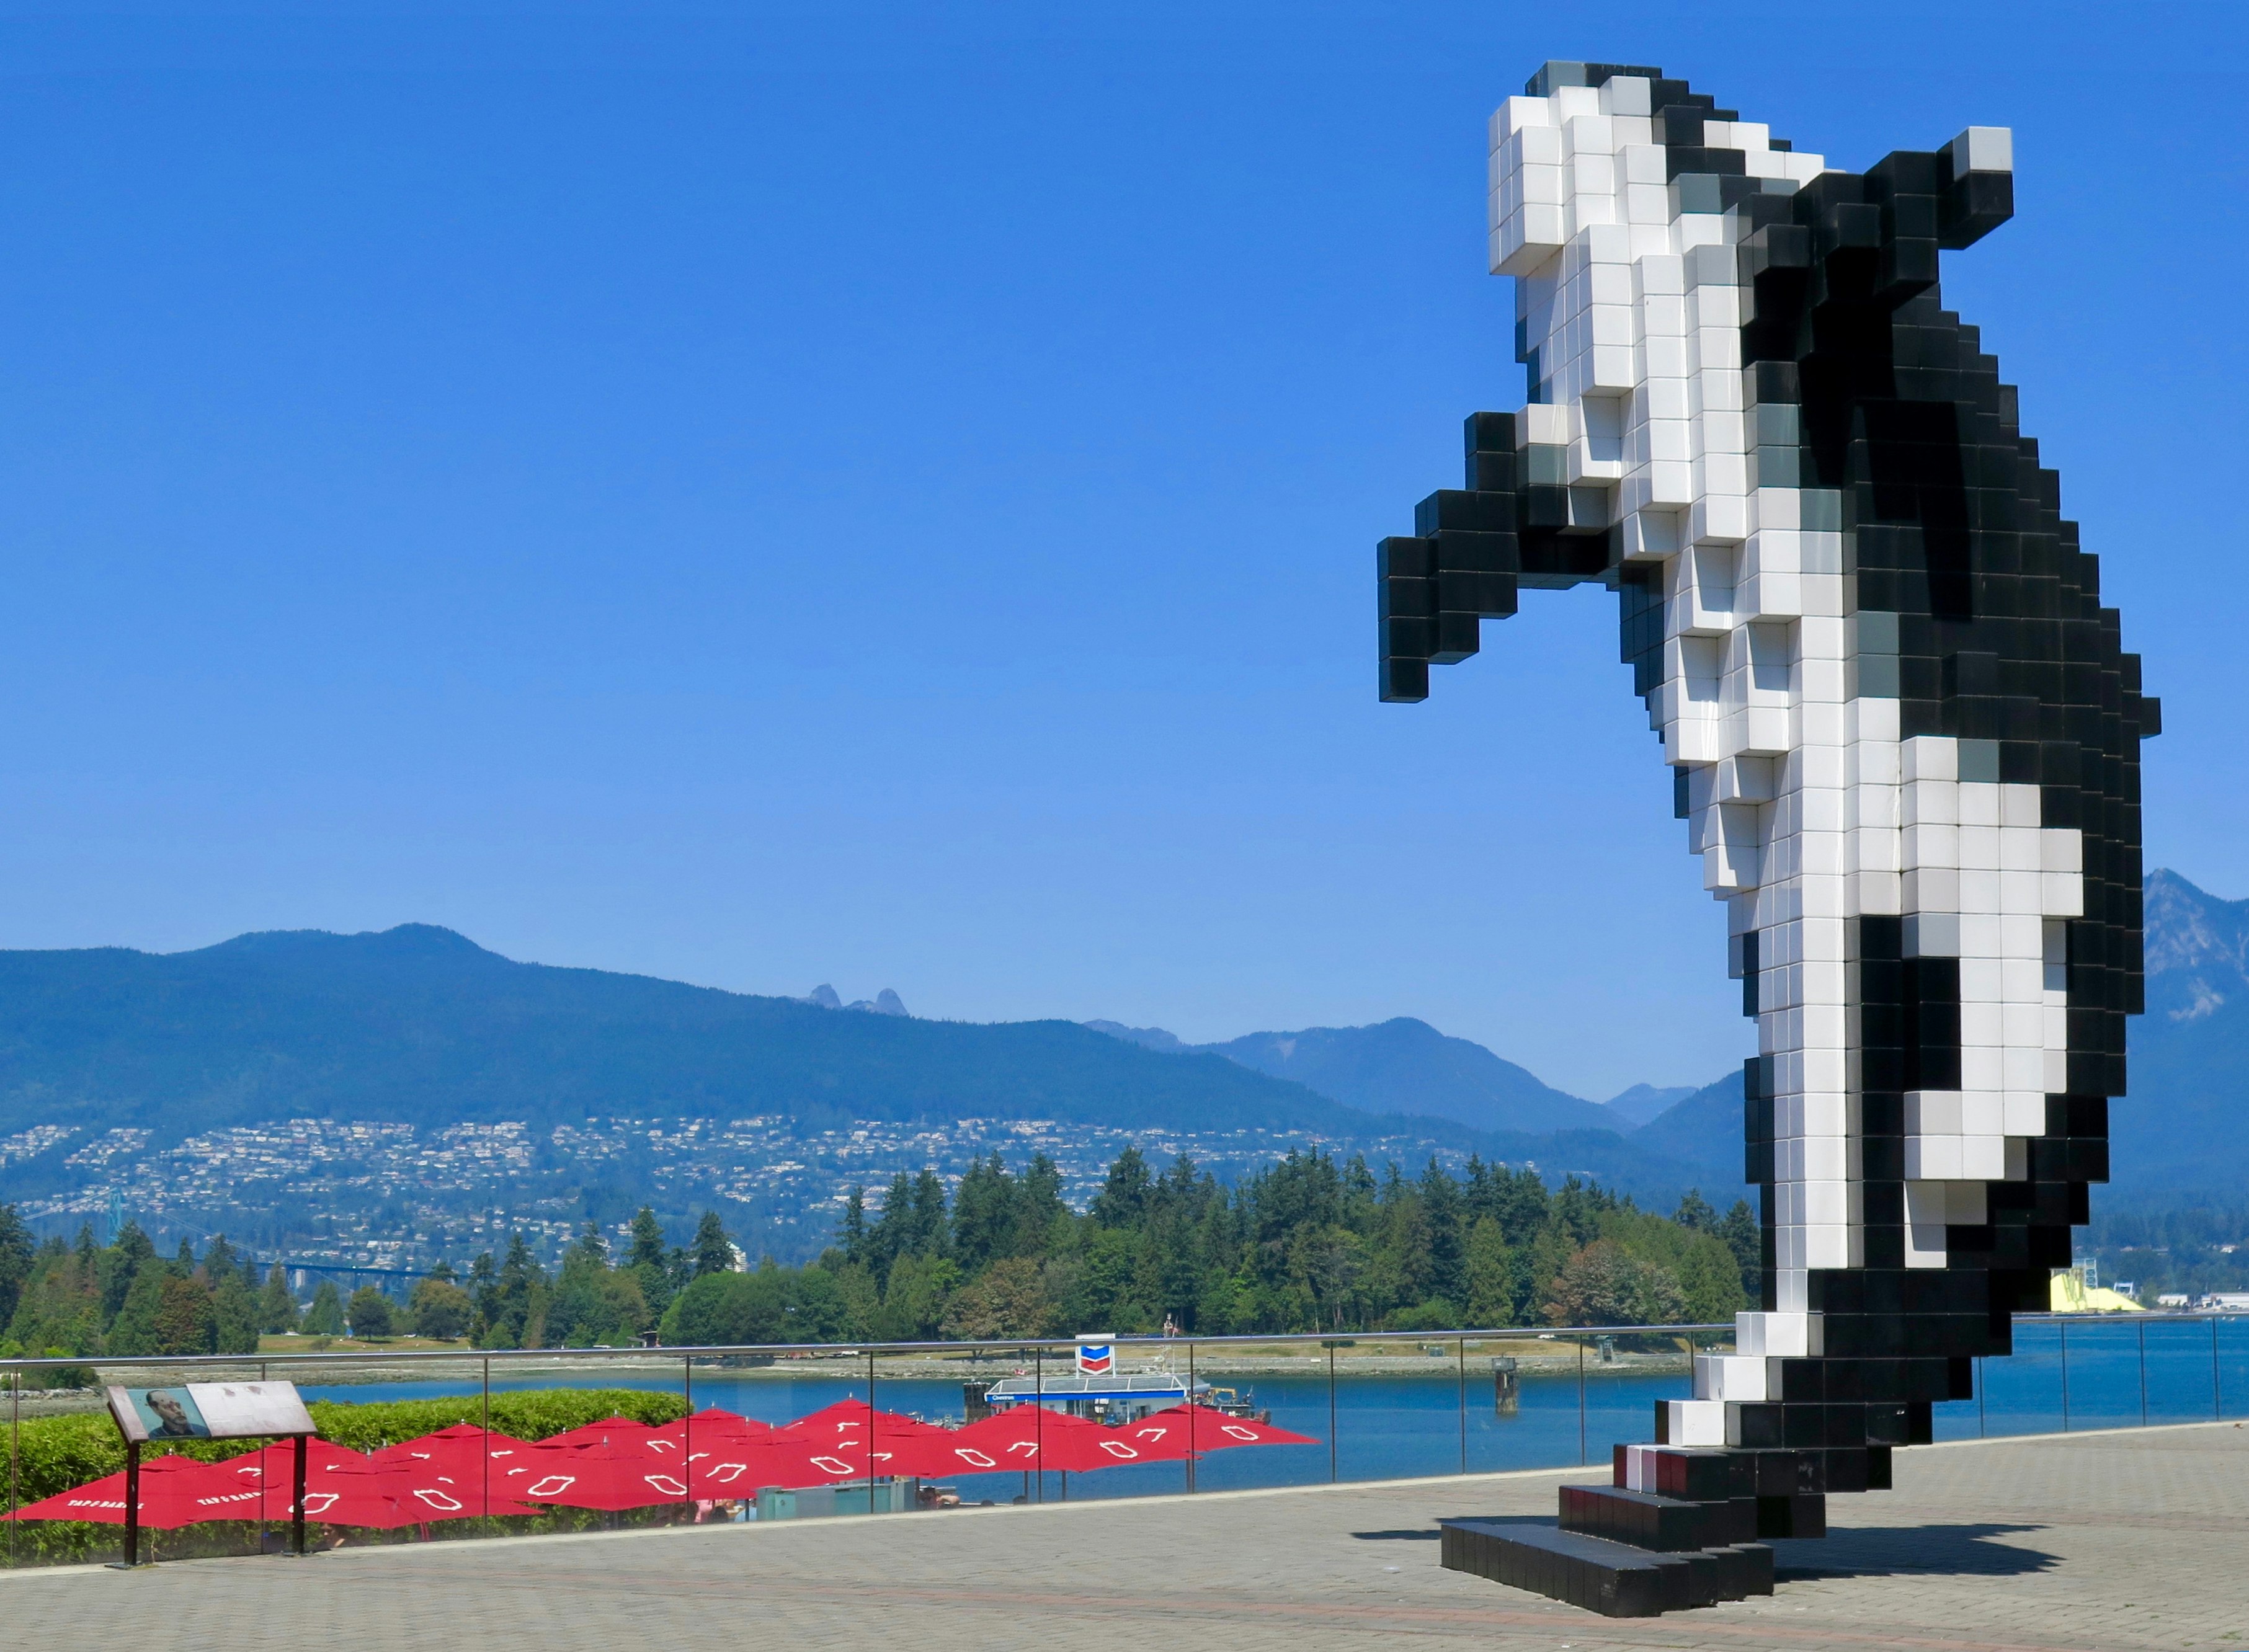 A large sculpture in Vancouver looks like an 8-bit, or Lego, representation of an orca leaping out of the water